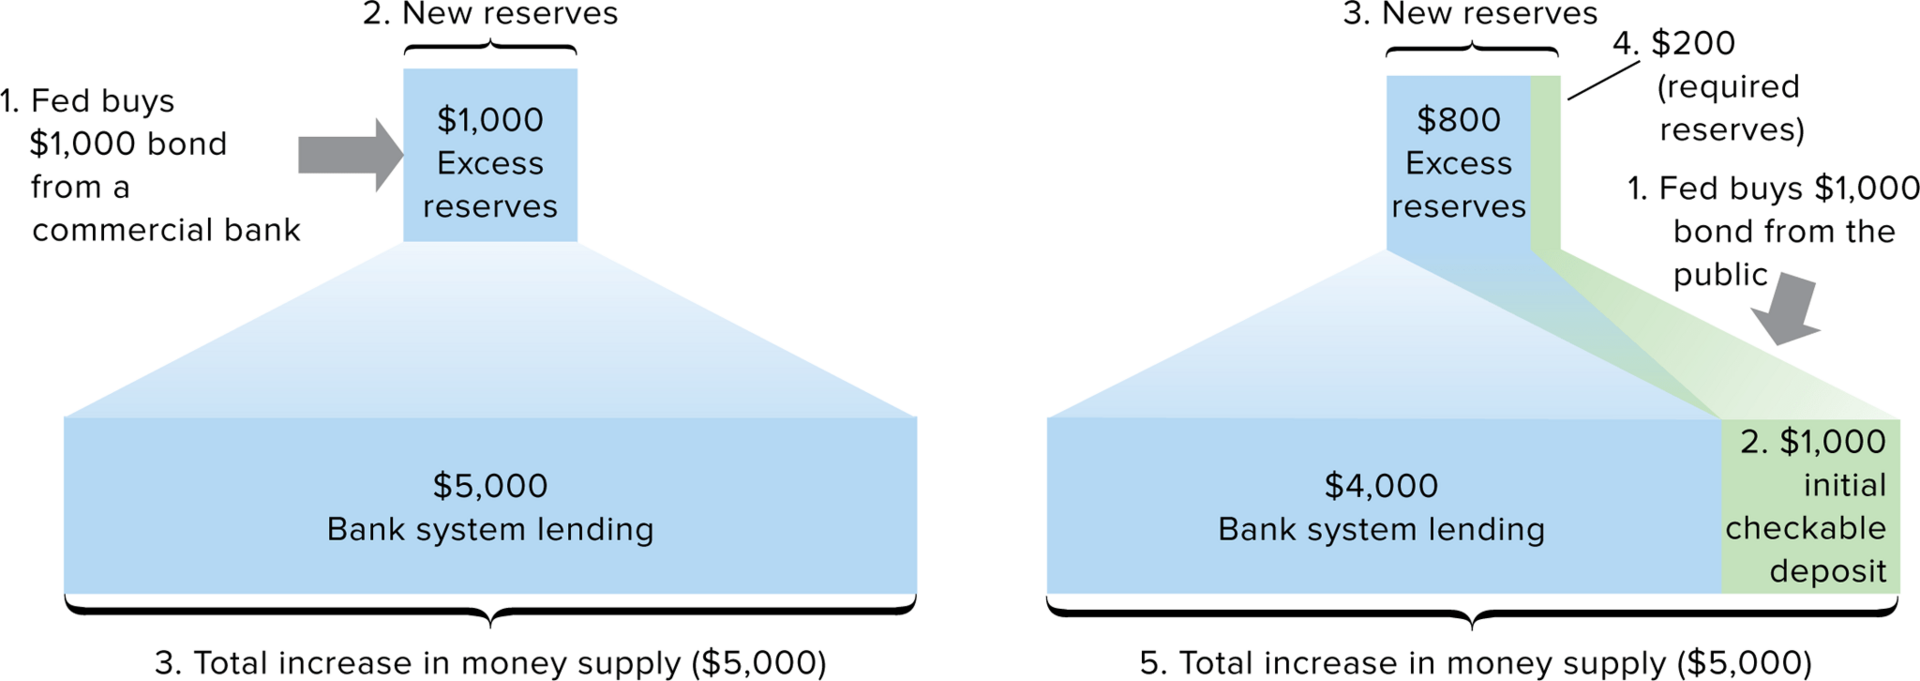 buying from a commercial bank (left) vs buying from the public (right)